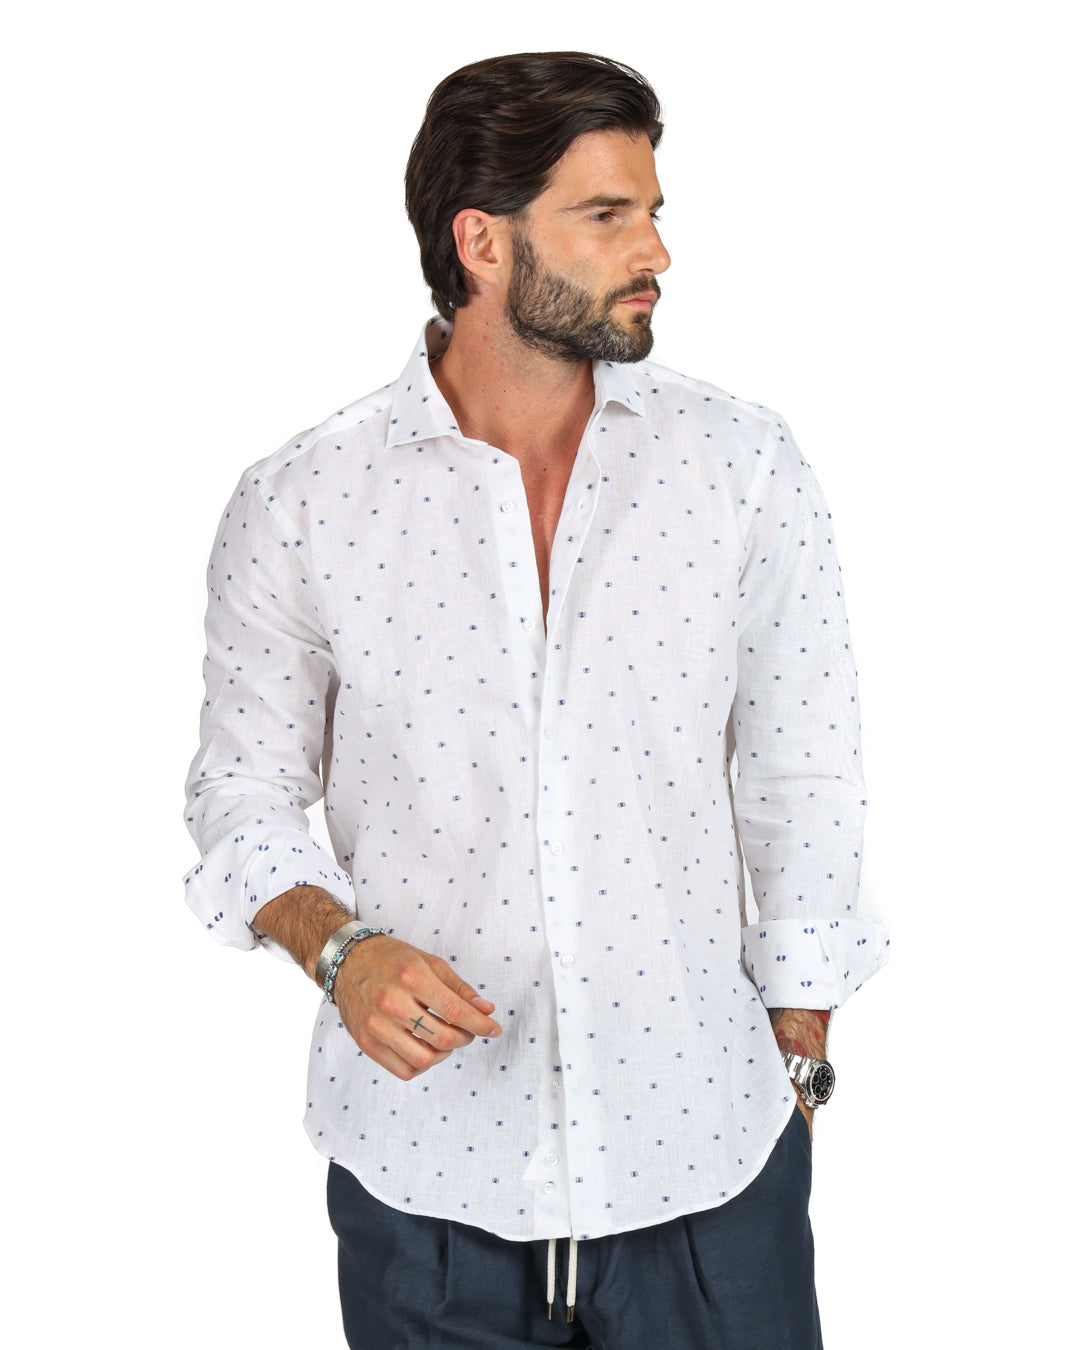 Salina - Classic white linen shirt with blue embroidery